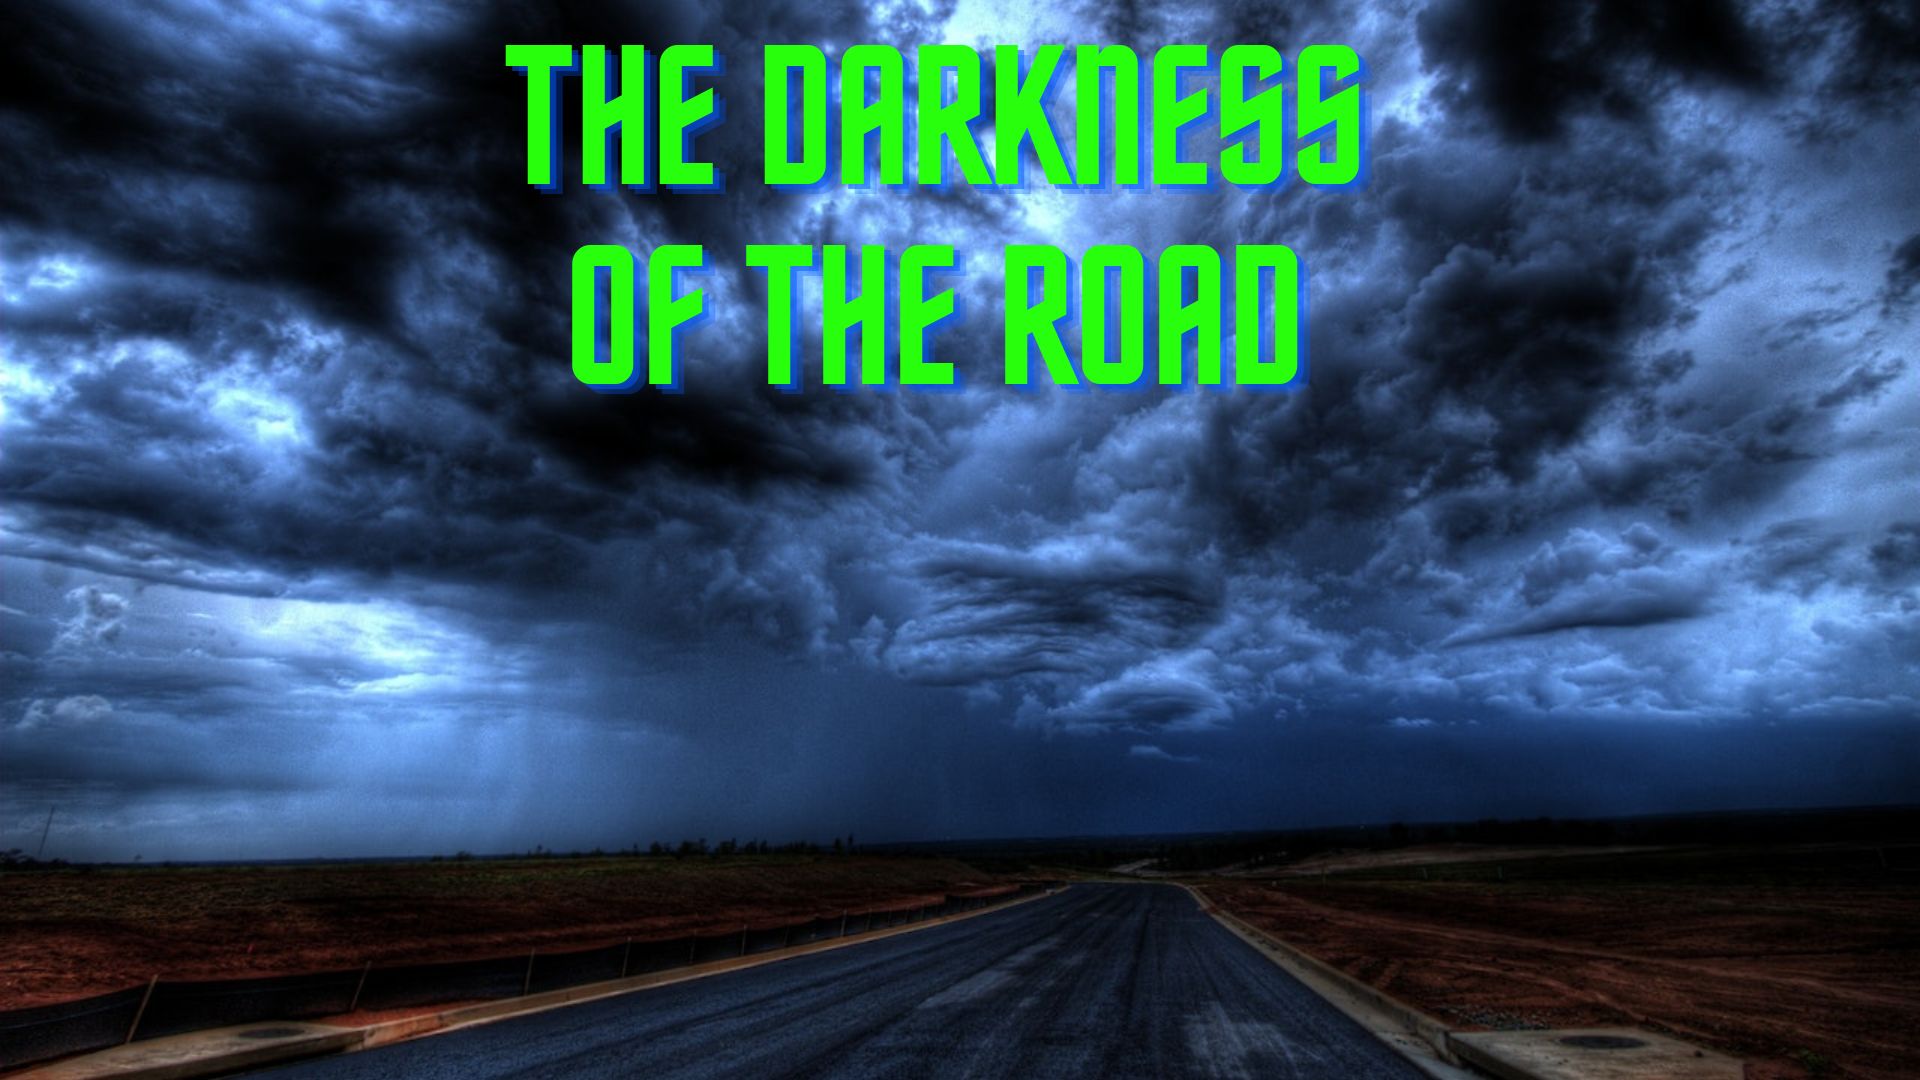 The Darkness Of The Road Dreams - What Does It Represent?